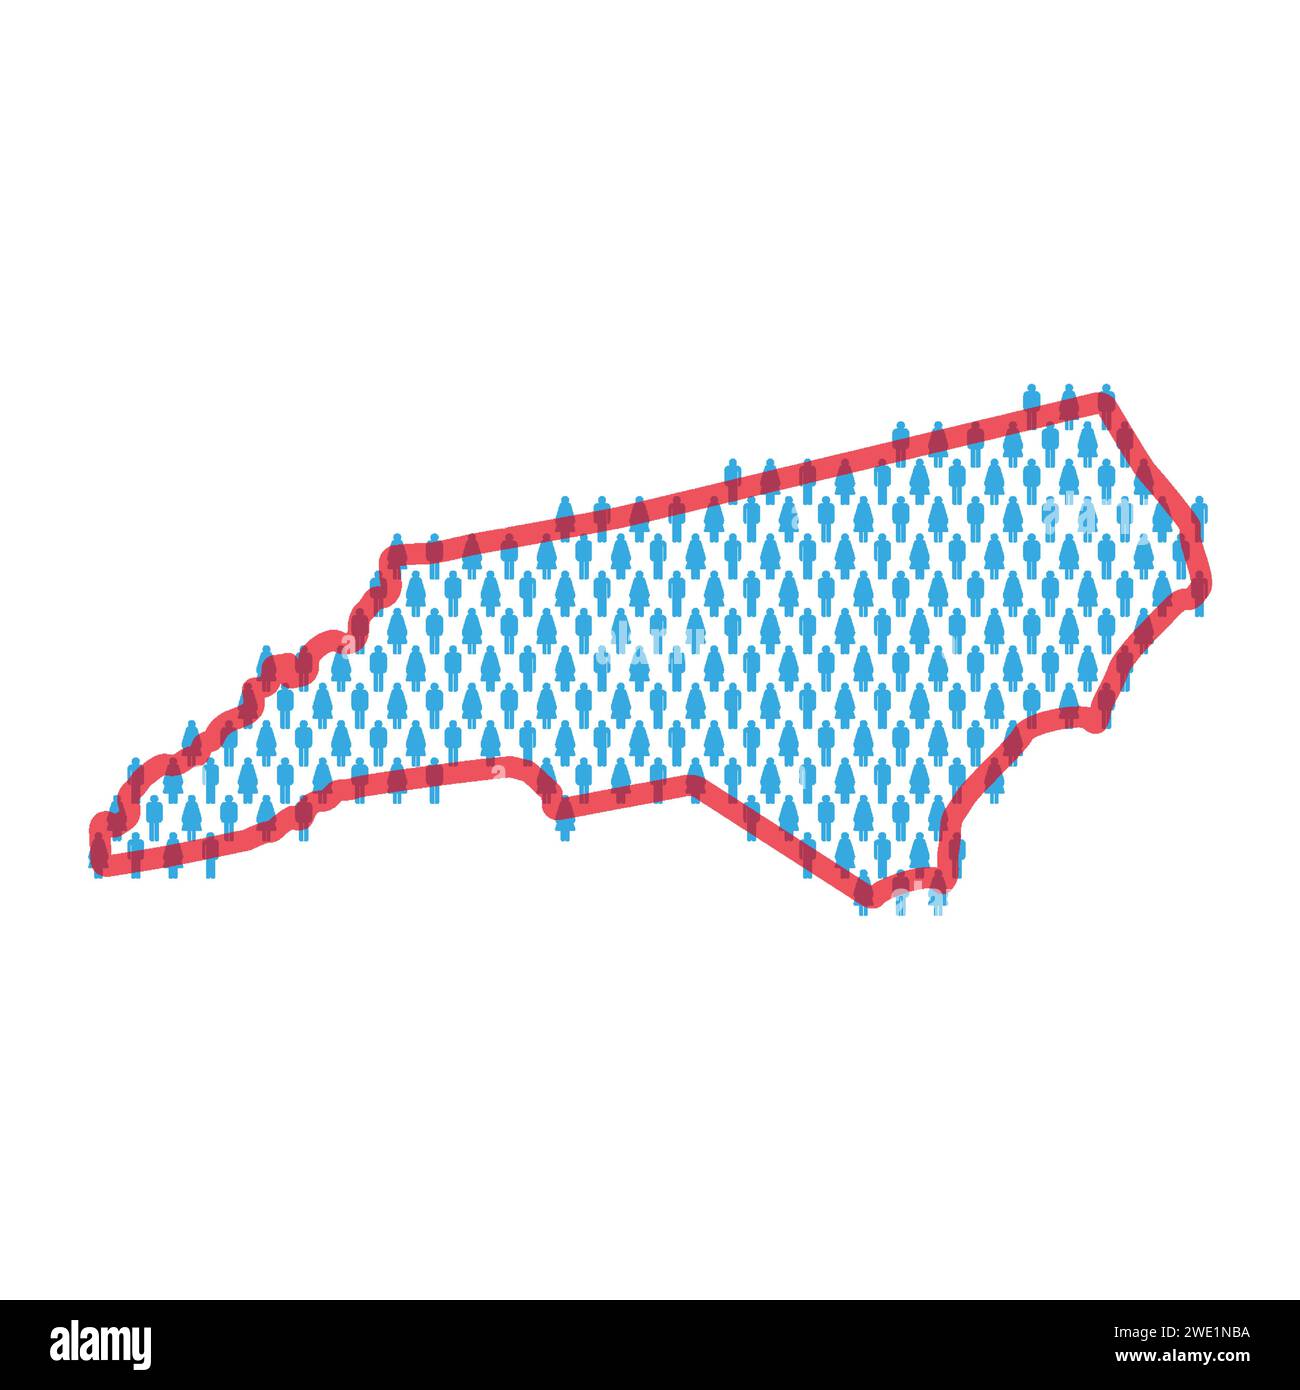 North Carolina population map. Stick figures people map with bold red translucent state border. Pattern of men and women icons. Isolated vector illust Stock Vector